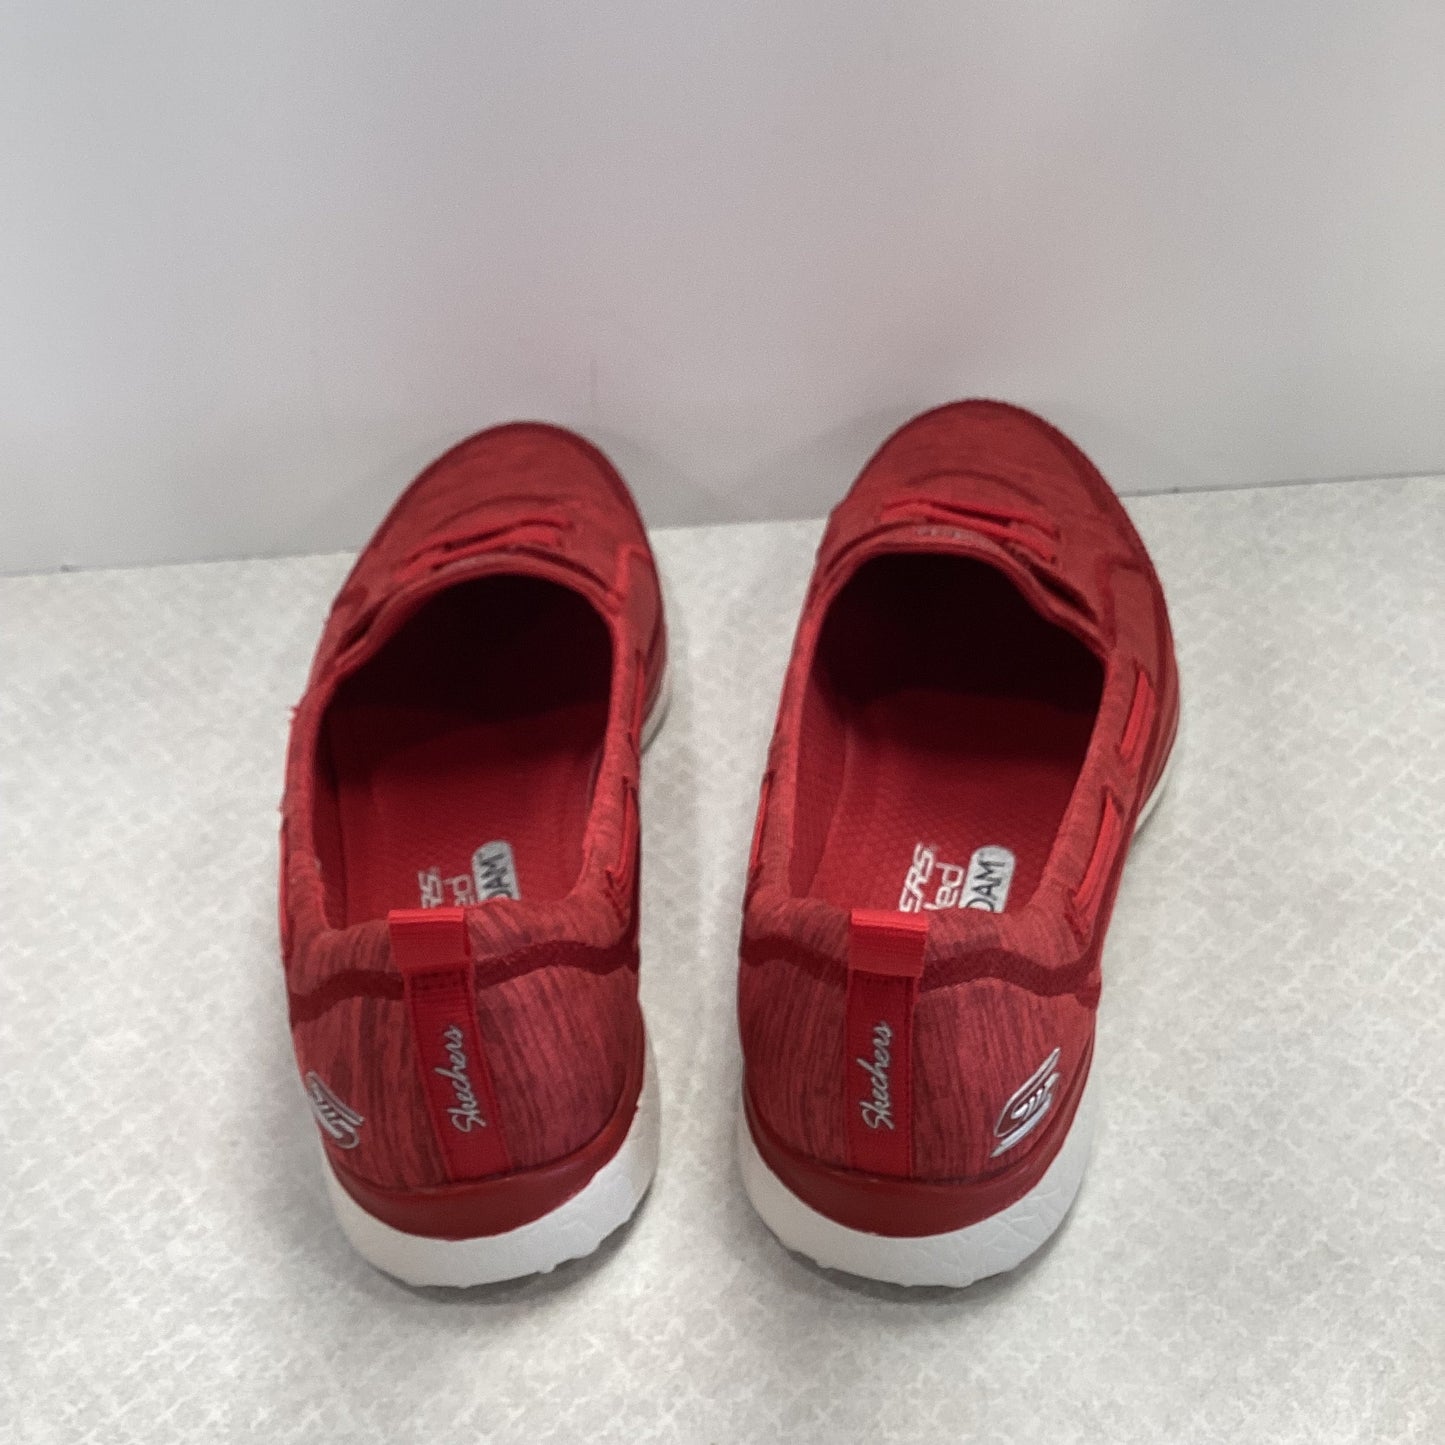 Red Shoes Flats Skechers, Size 8.5